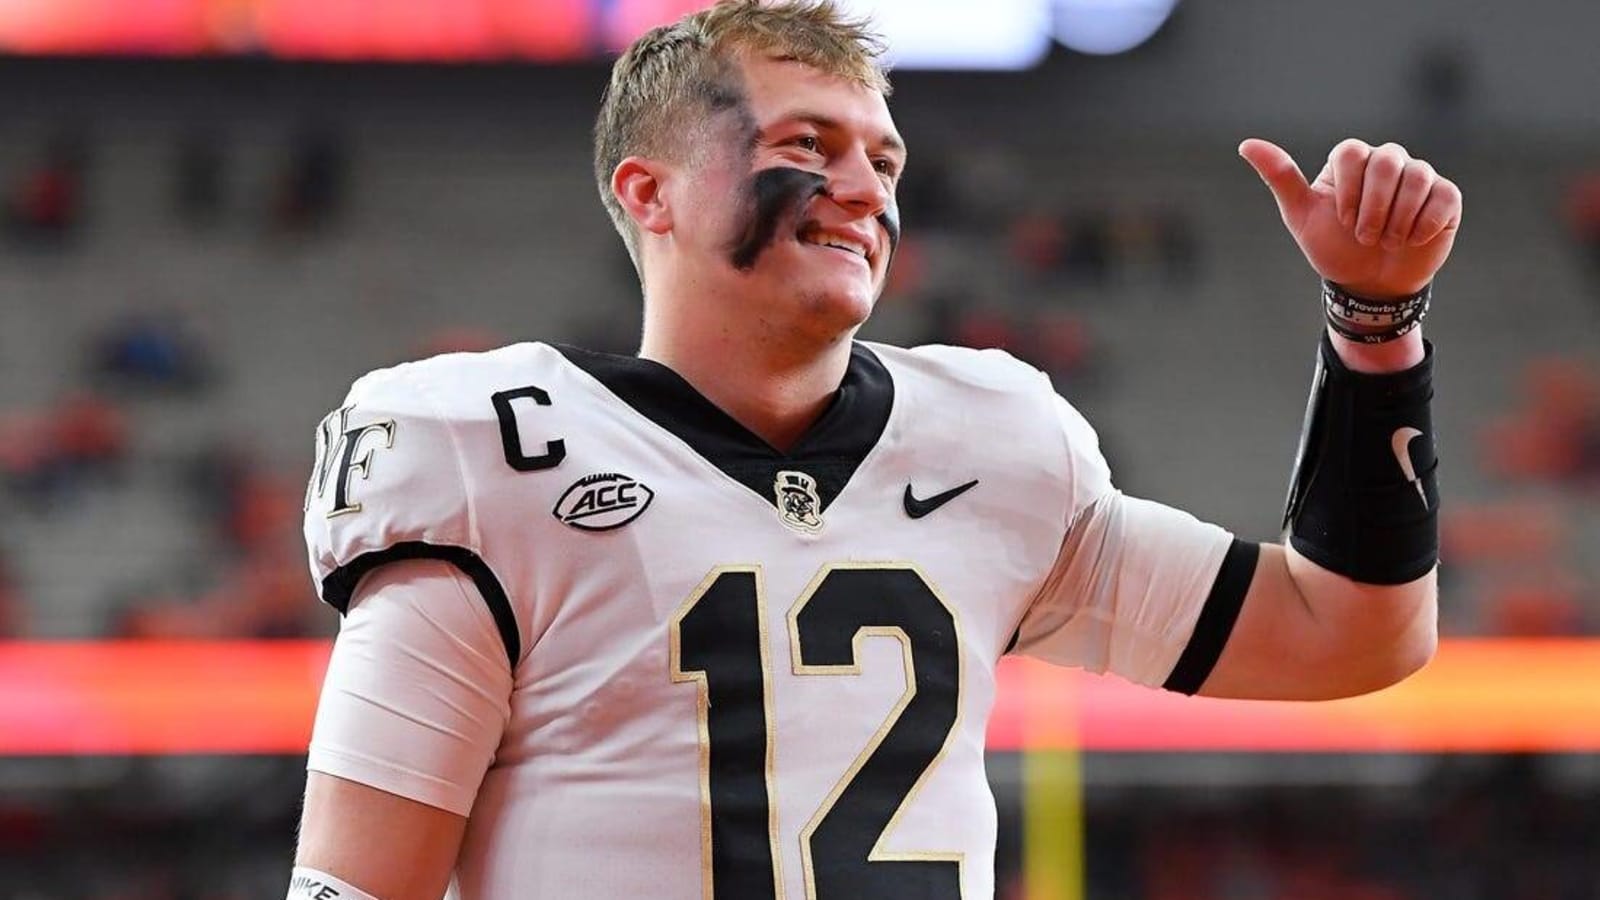 Wake Forest losing two QBs to transfer portal